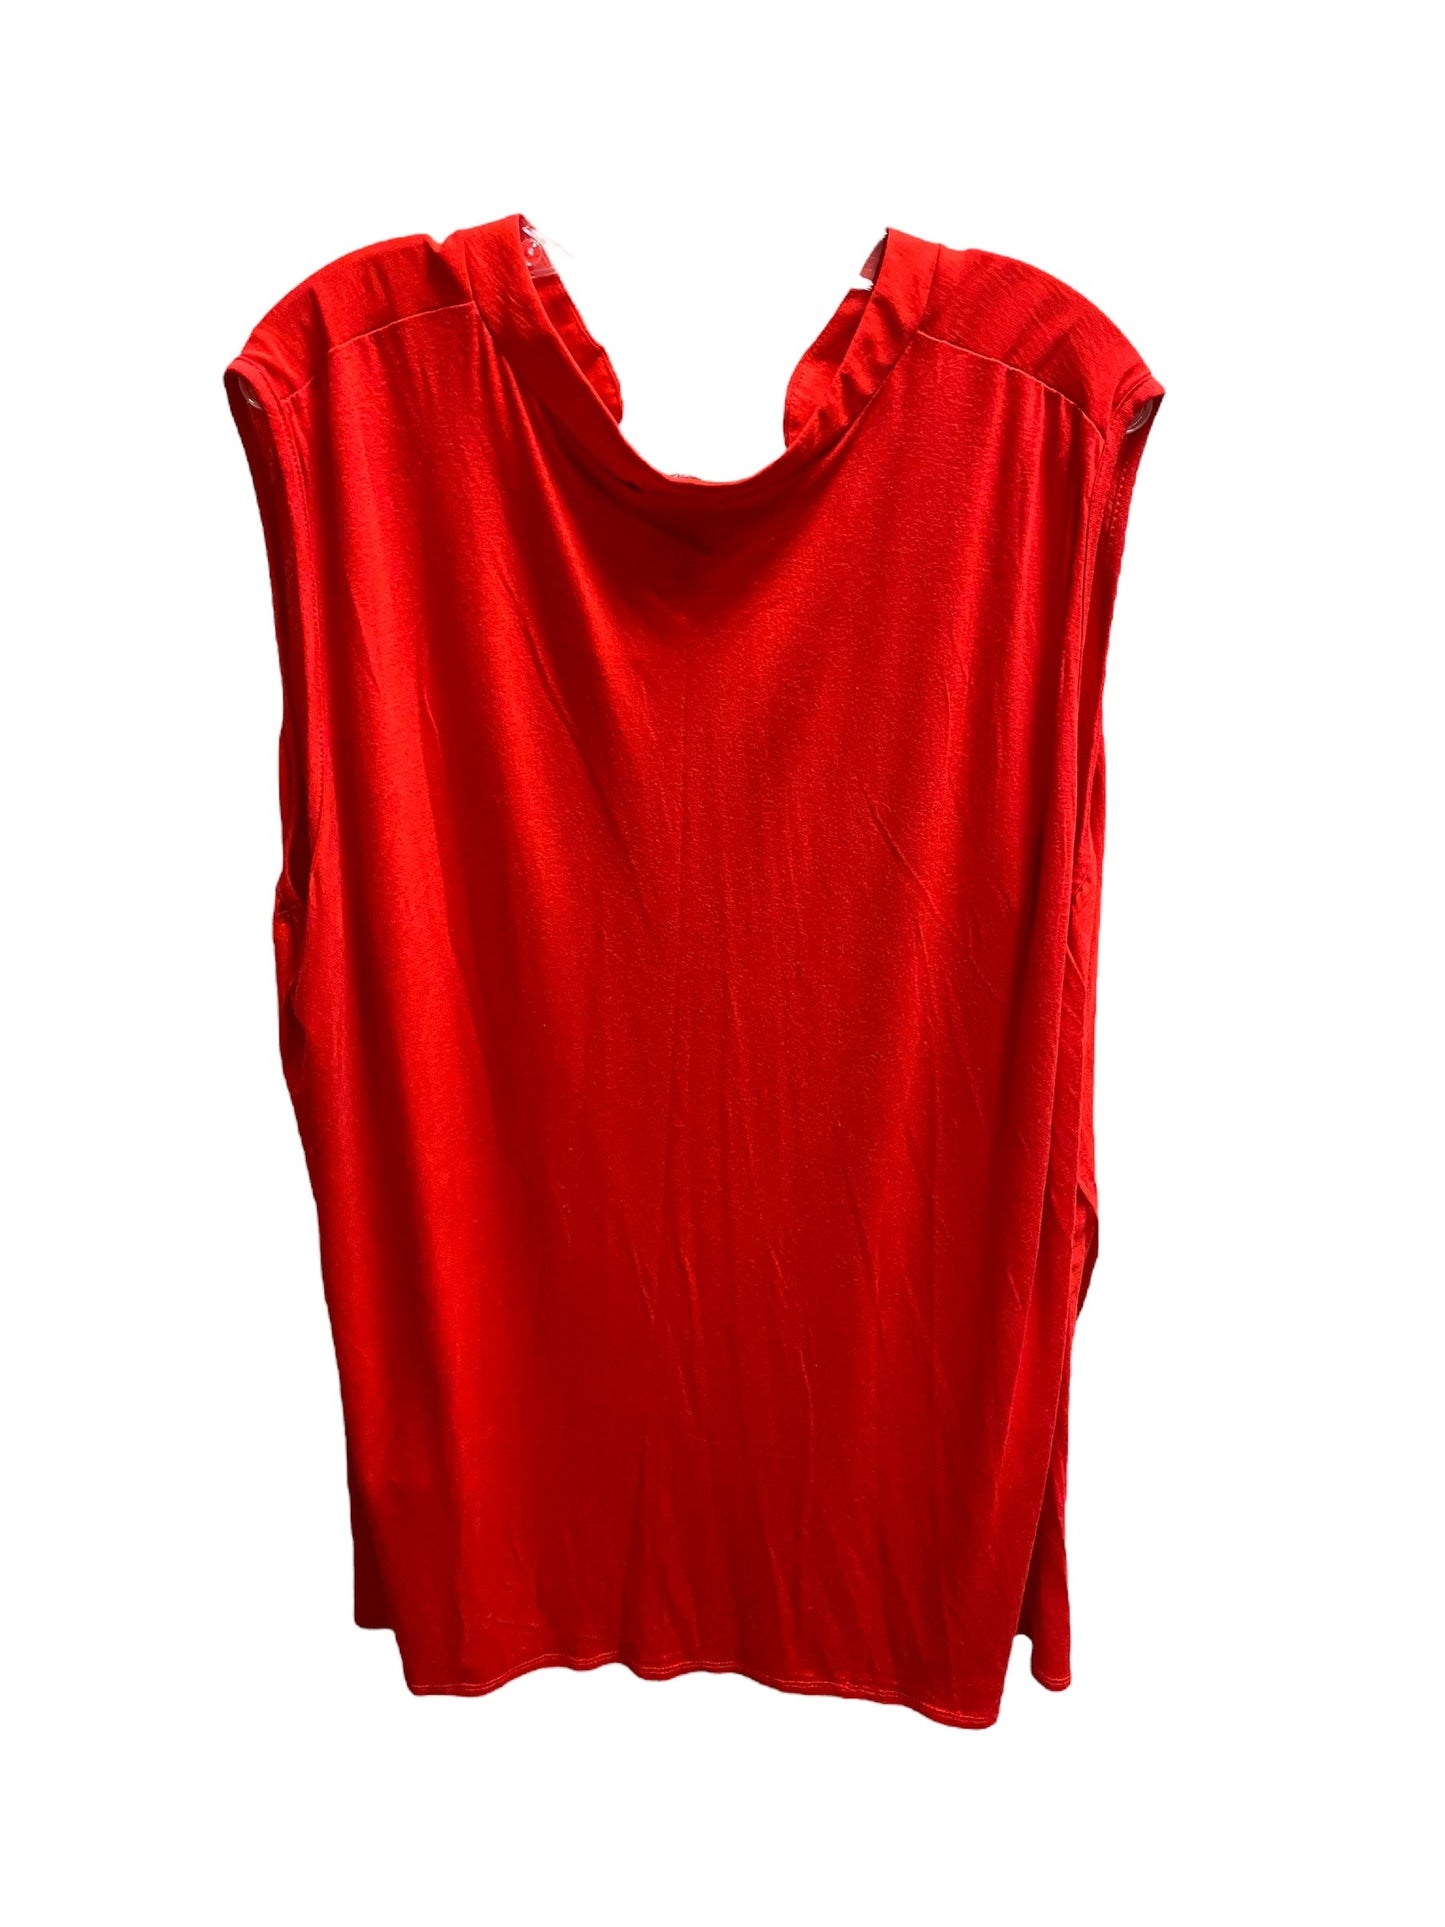 Red Top Sleeveless Cha Cha Vente, Size 3x